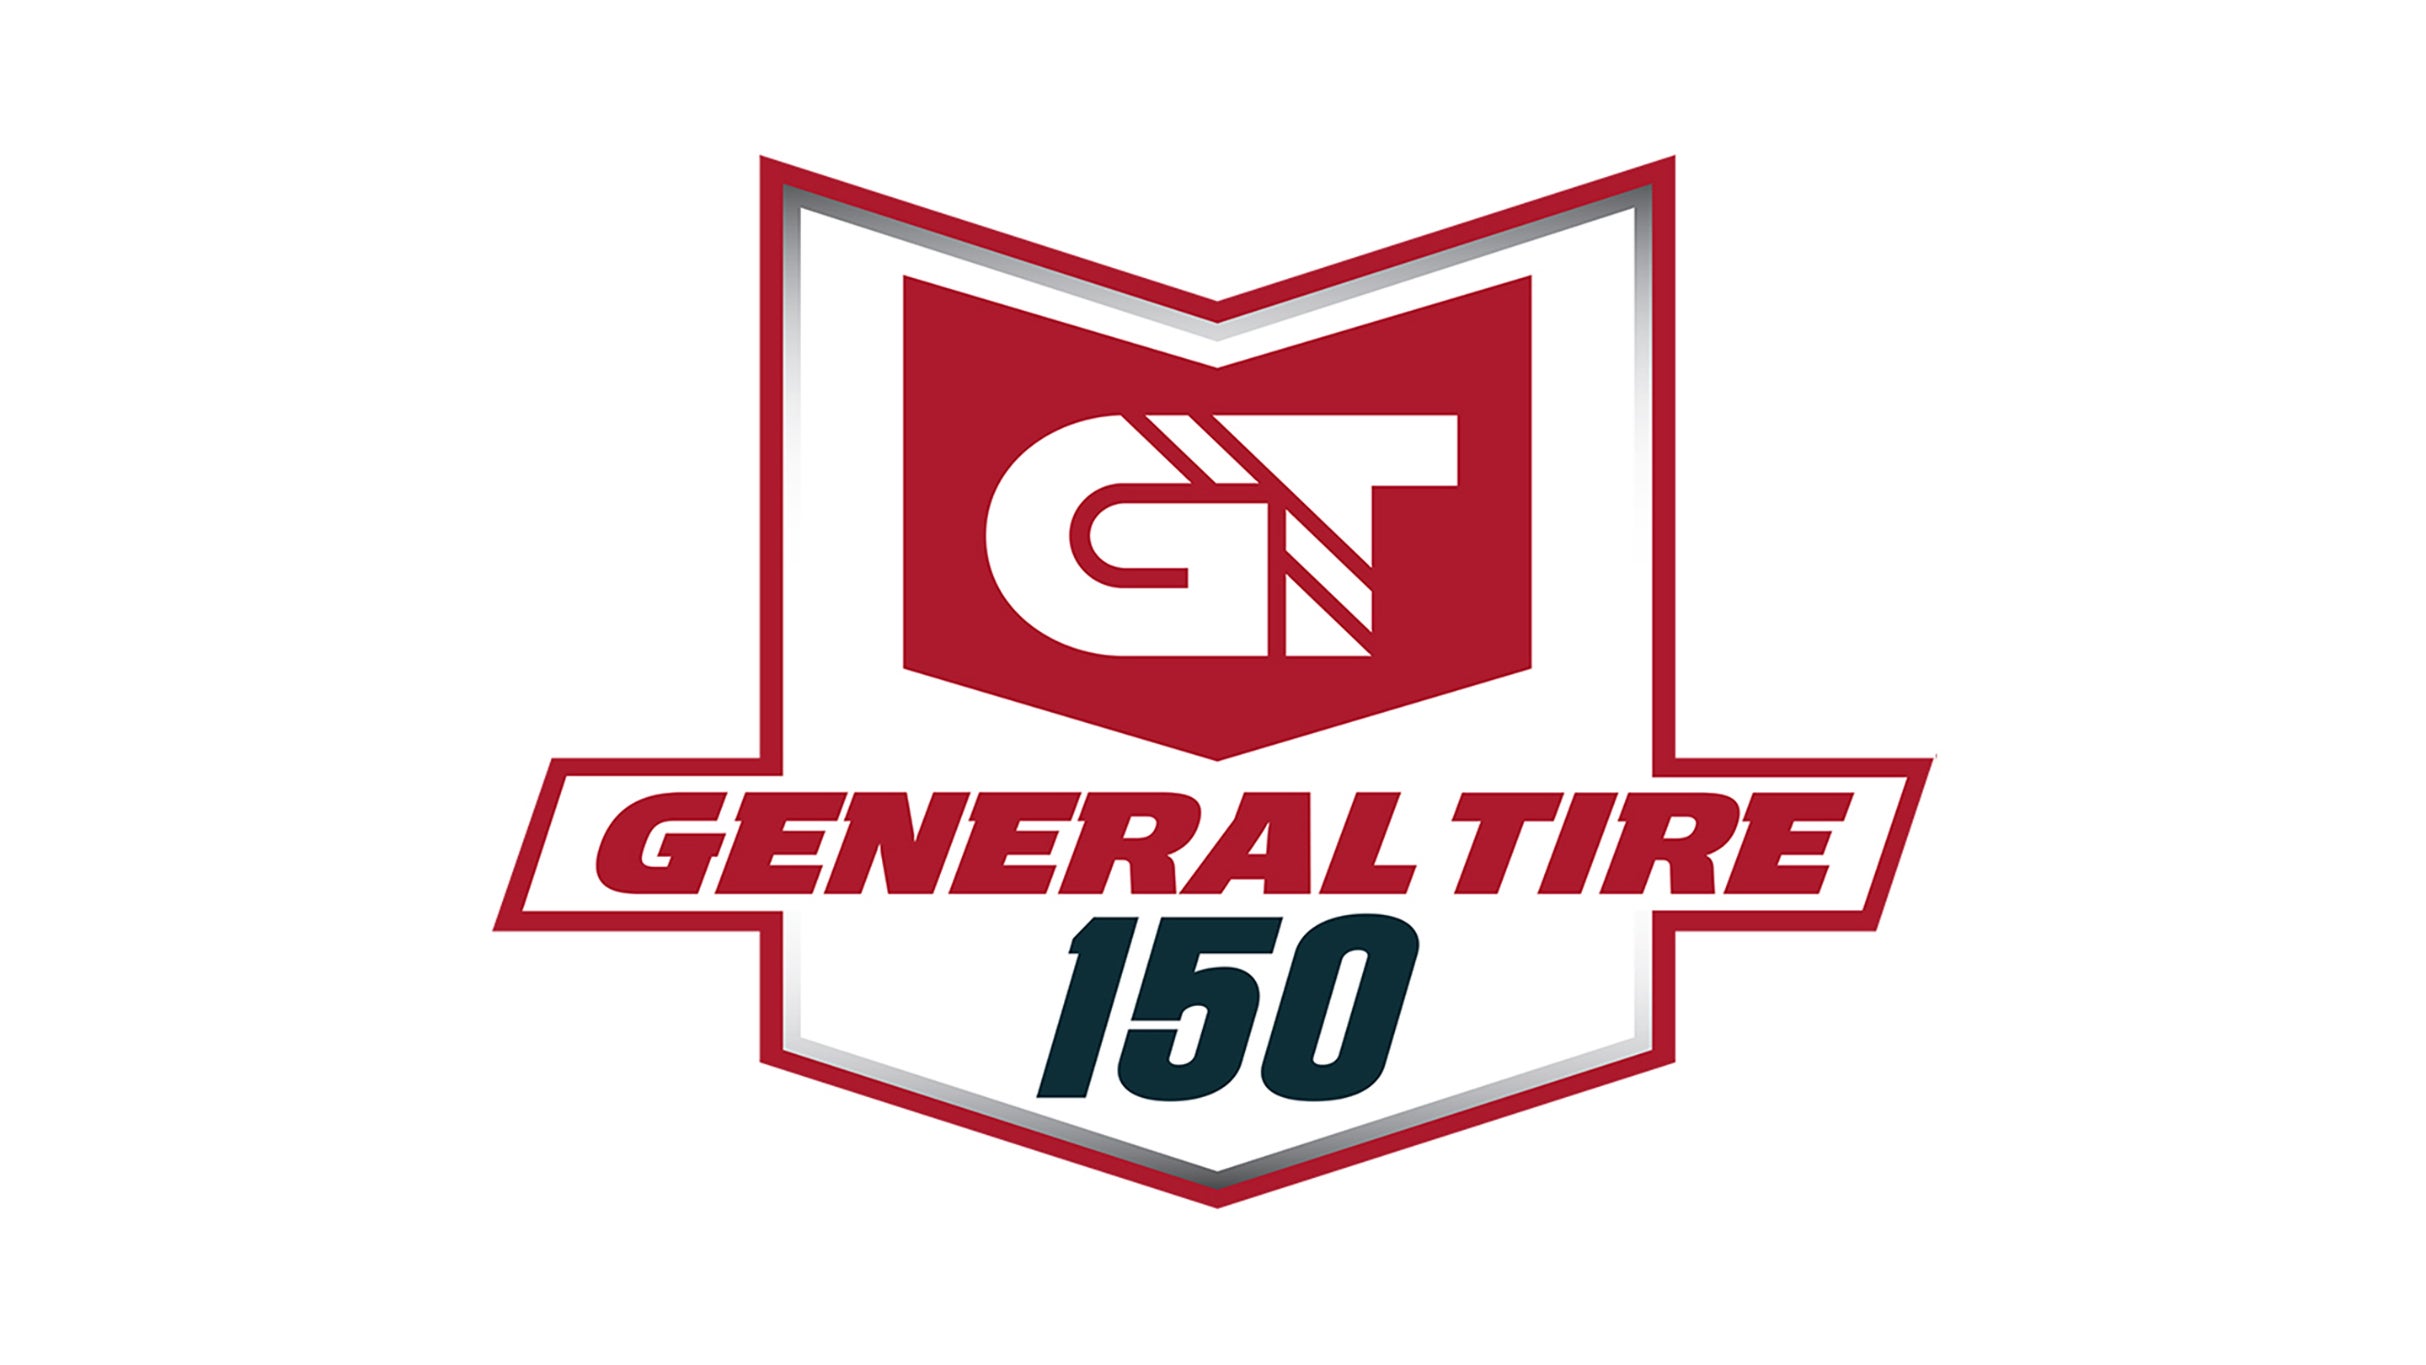 Ticket Reselling General Tire 150